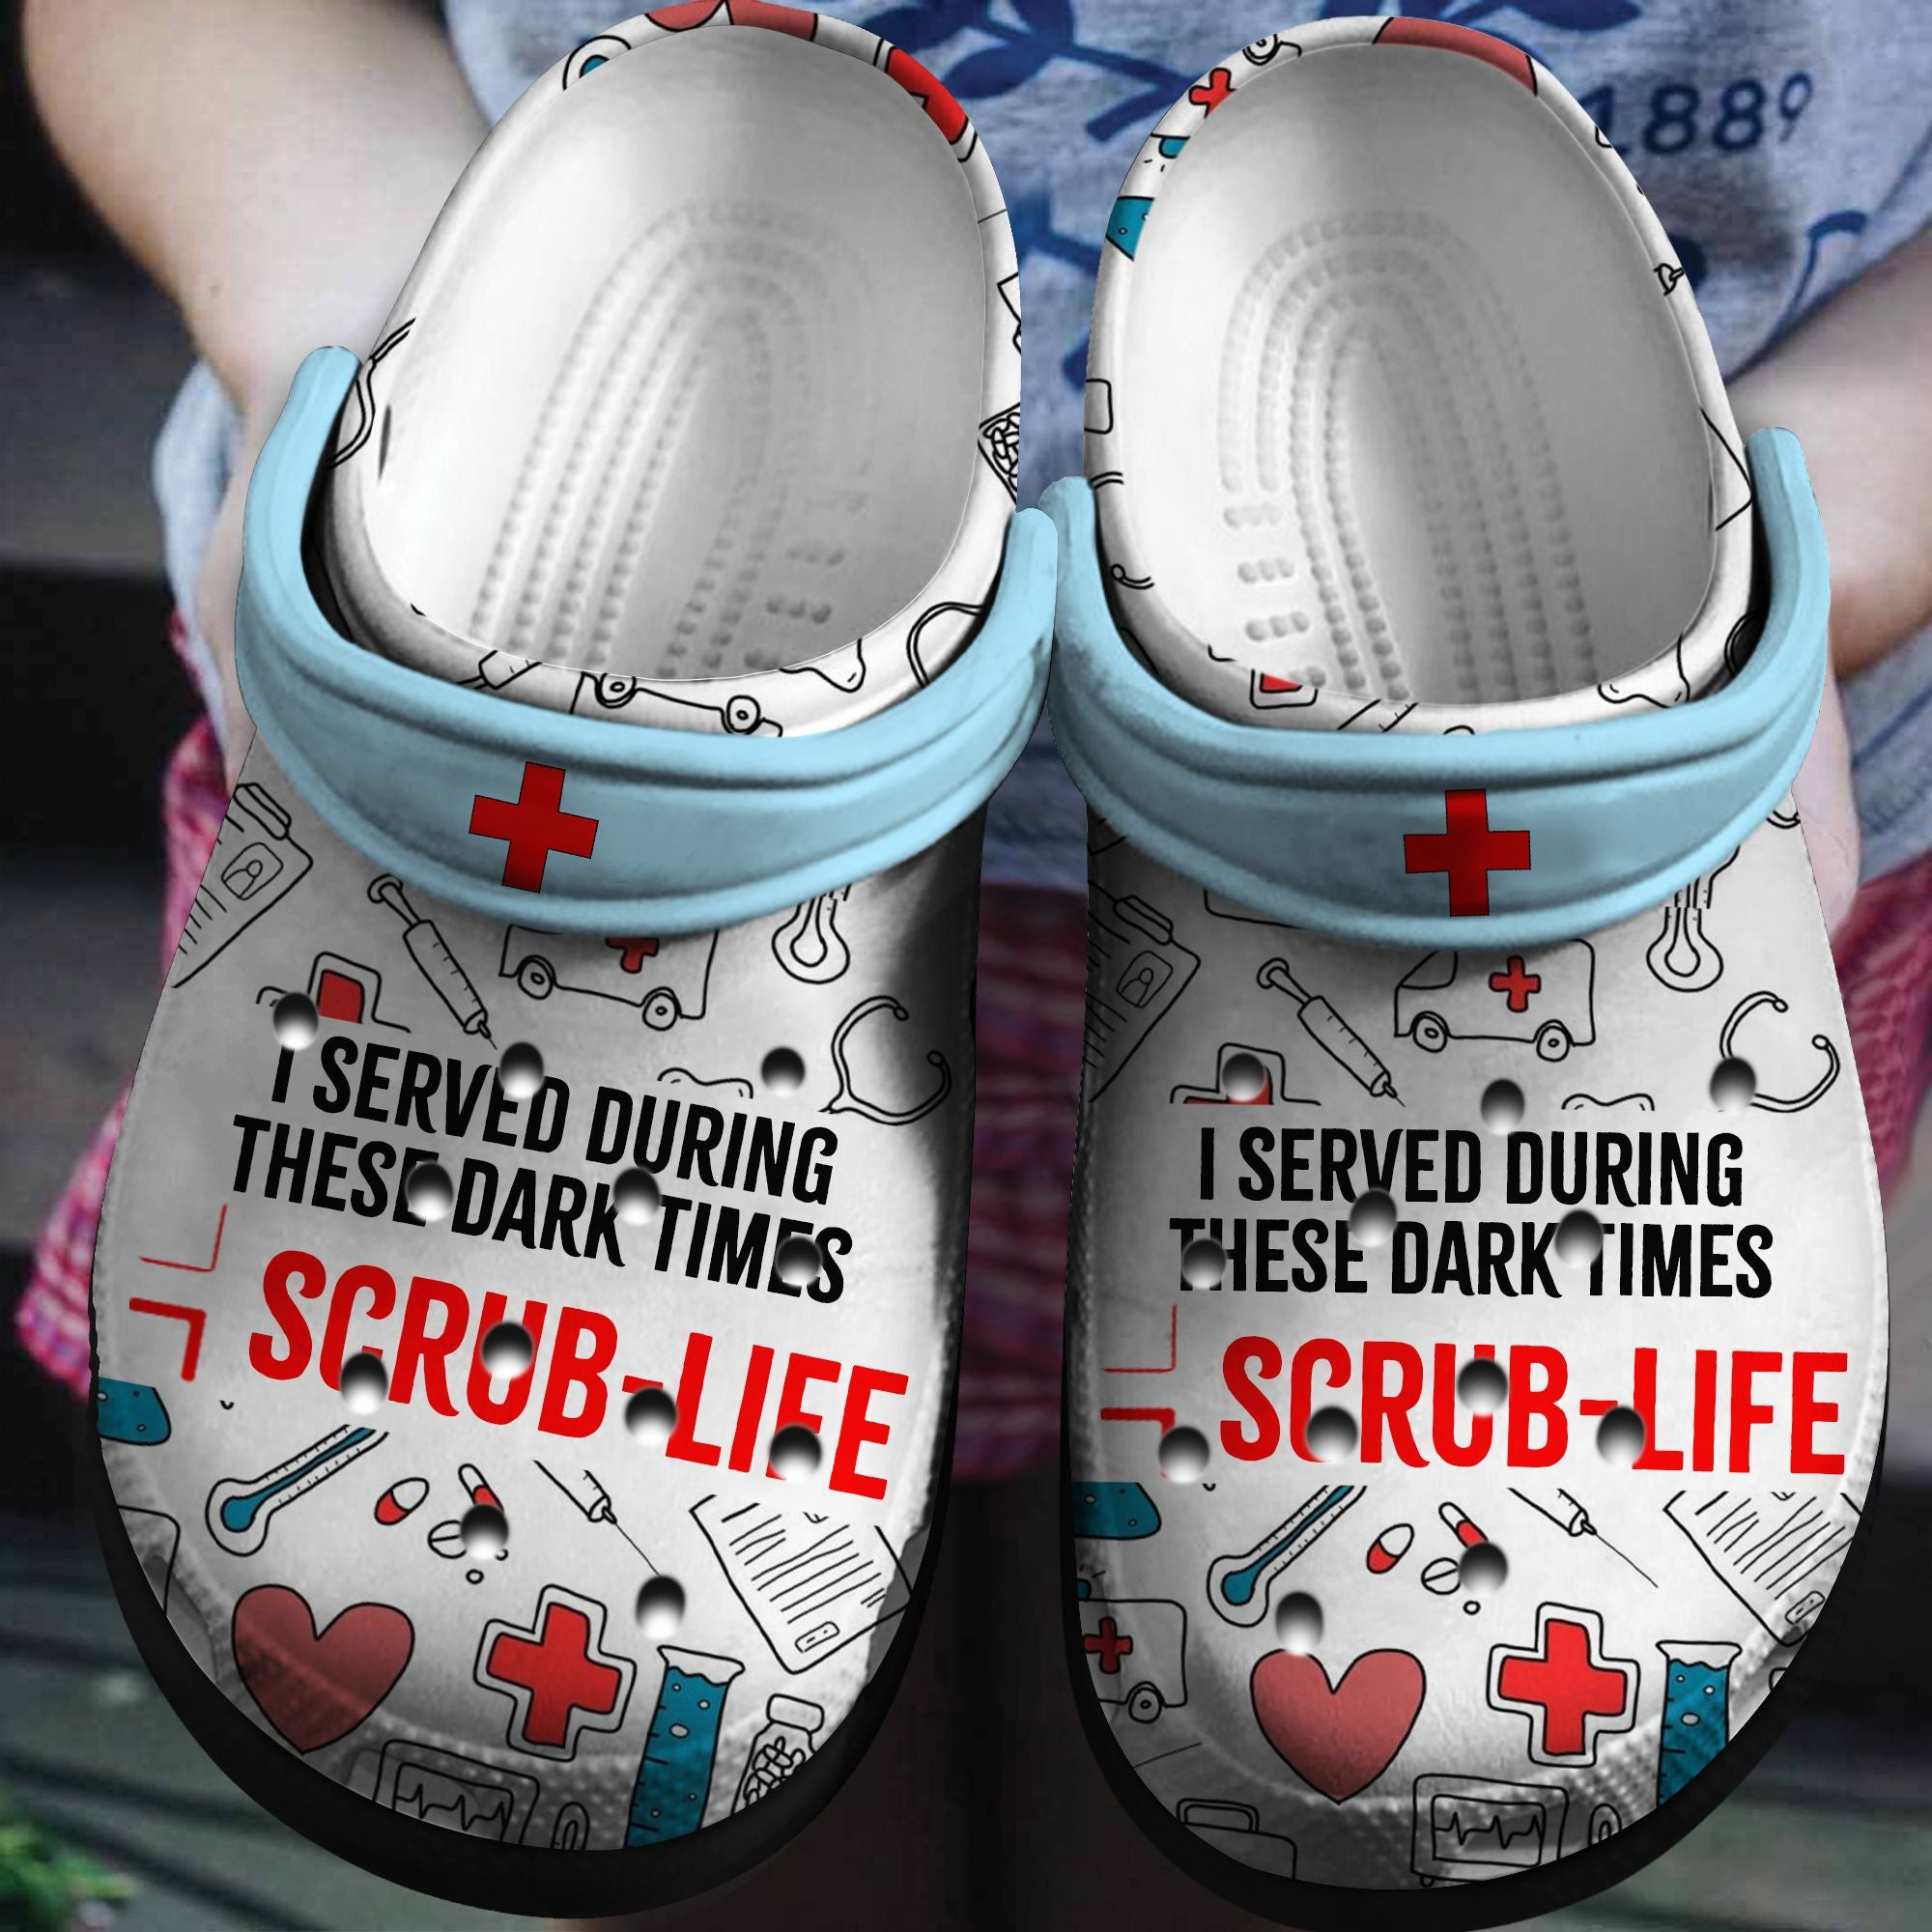 I Served During These Dark Times Shoes - Nurse Life Custom Shoes Birthday Gift For Men Women Boy Girl